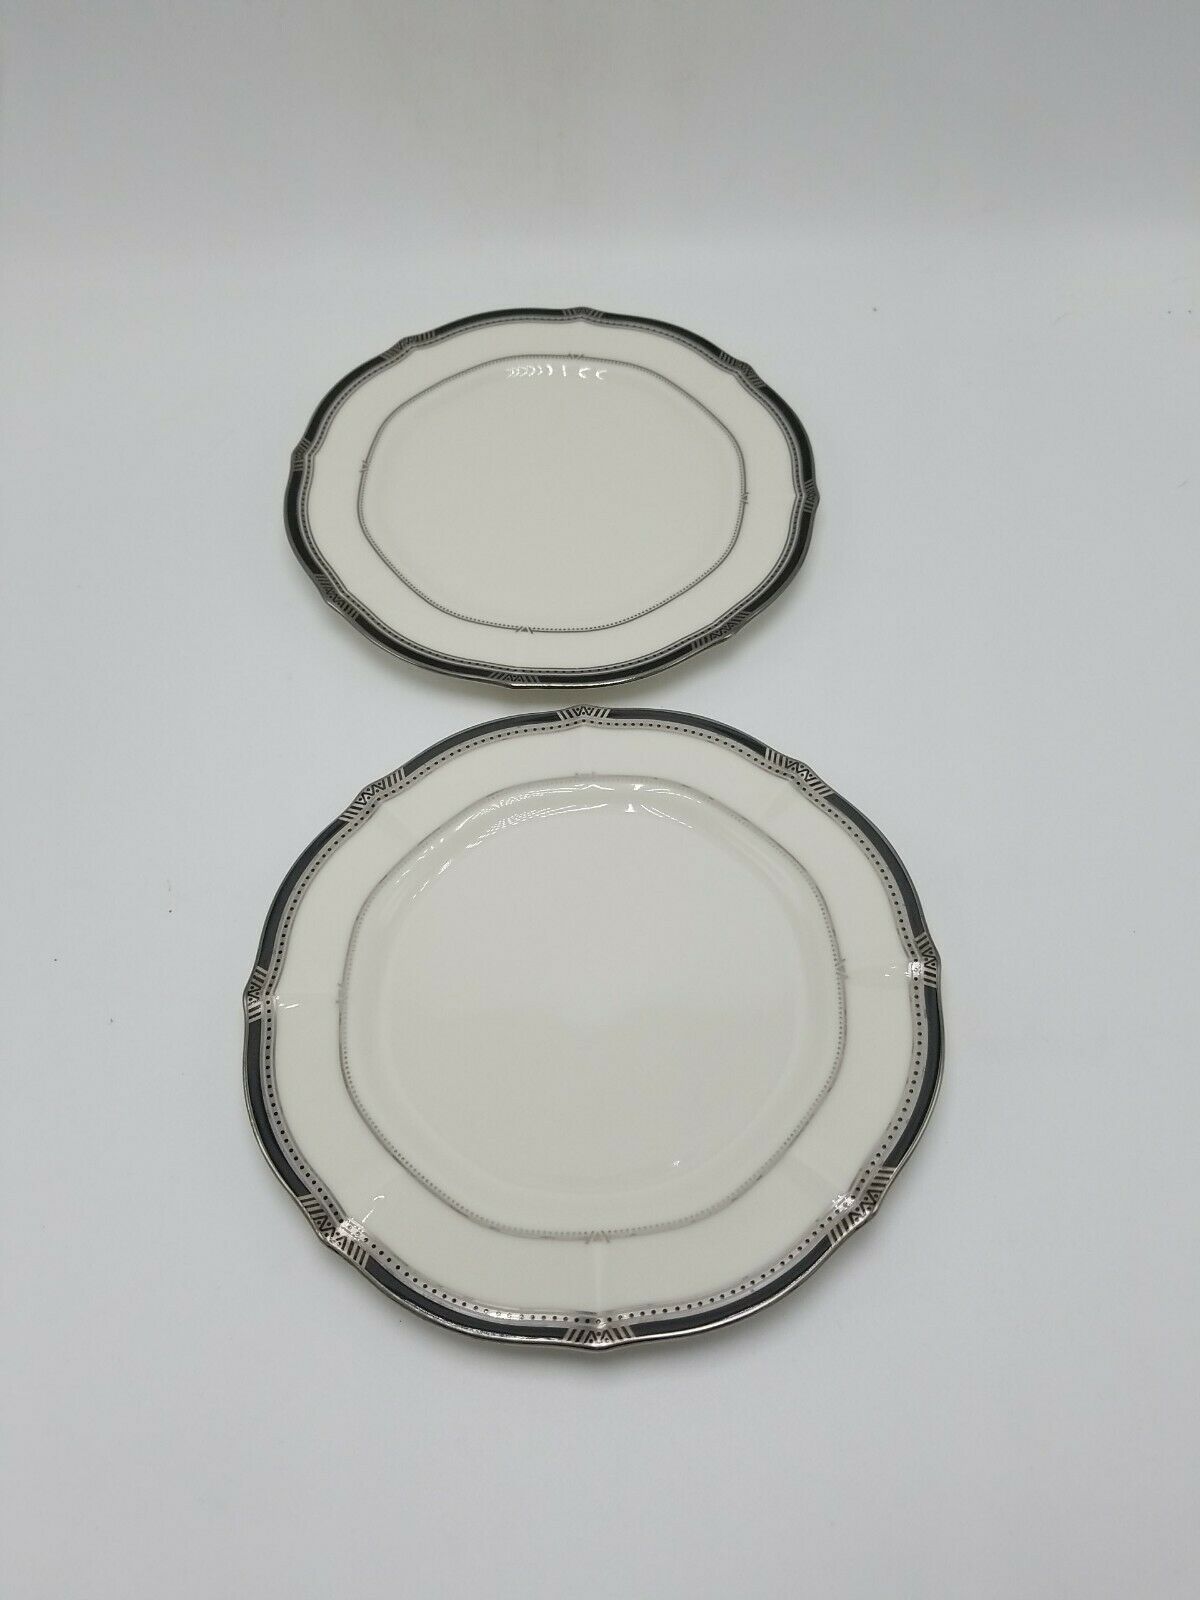 Noritake "gilded Platinum" Two (2) Bread Butter Plates - 7 Inch - Near Mint